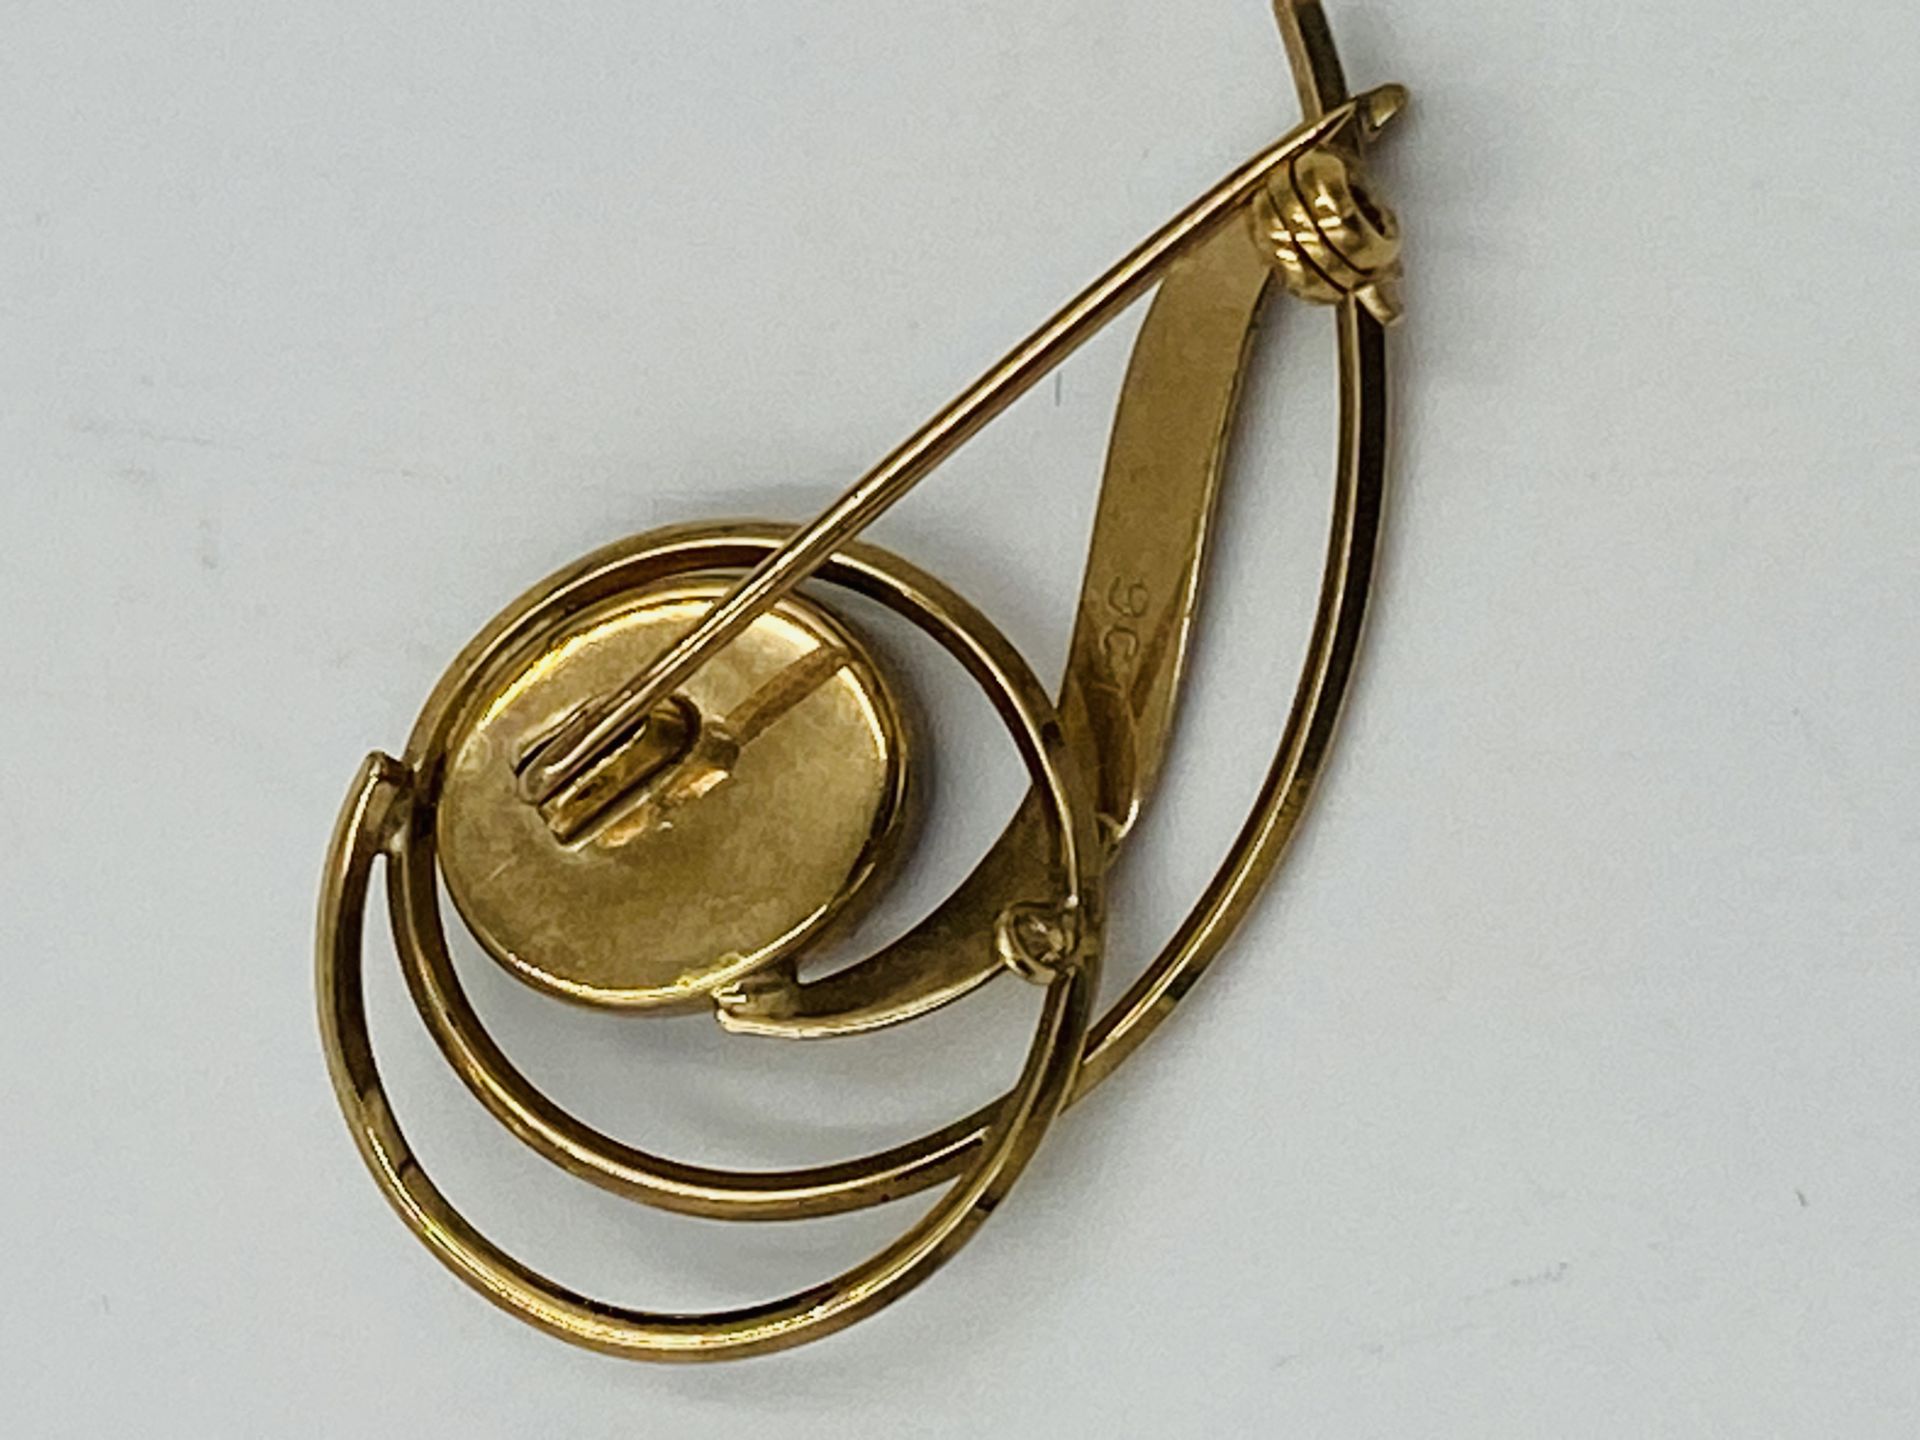 9ct gold brooch set with an opal - Image 4 of 5